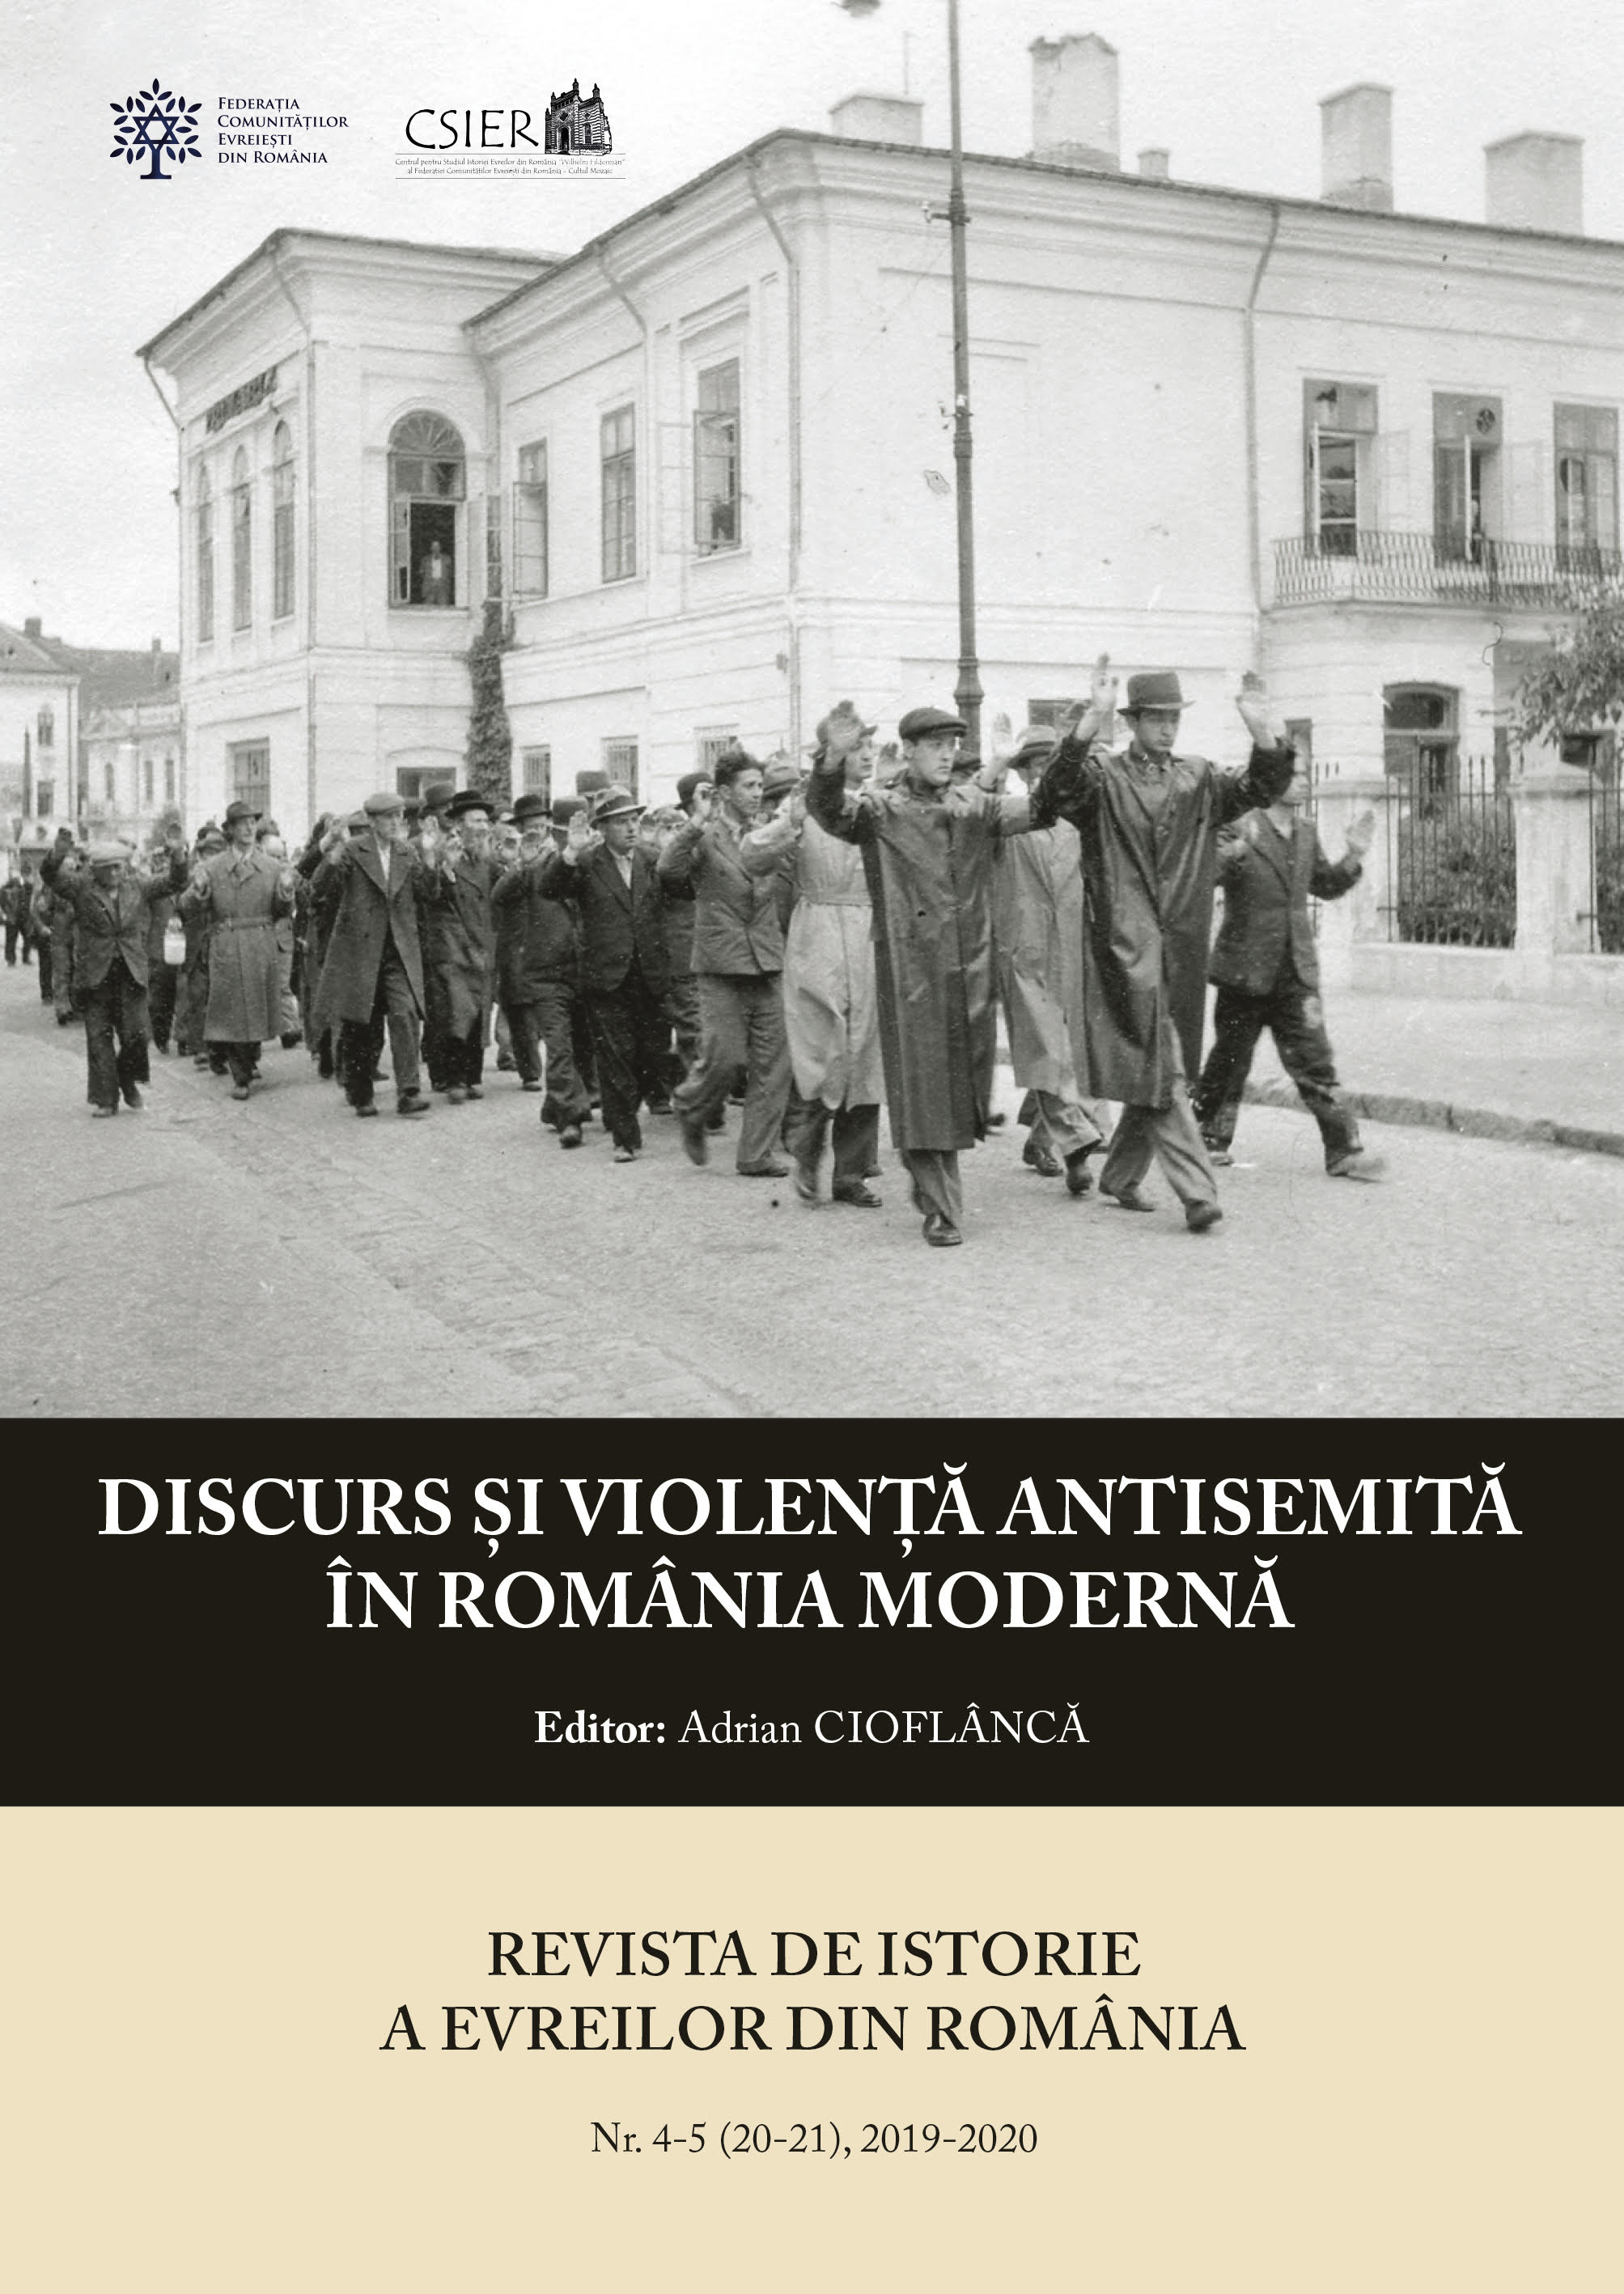 Miron Cristea, Patriarch of the Romanian Orthodox Church: His Political and Religious Influence on the Fate of Jews in Romania (February 1938 - March 1939) Cover Image